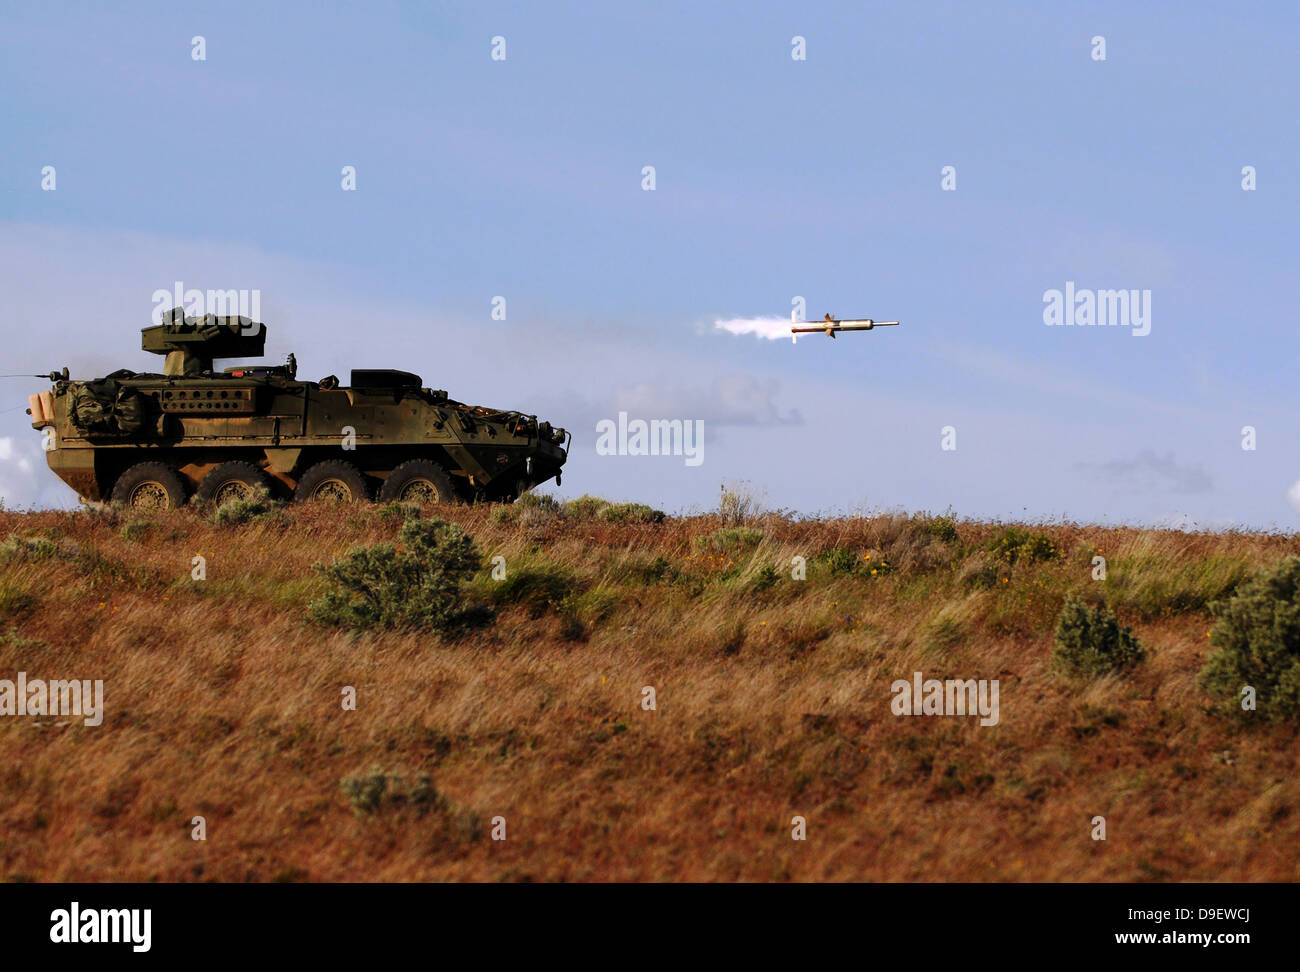 A TOW missile is launched from an armored vehicle. Stock Photo